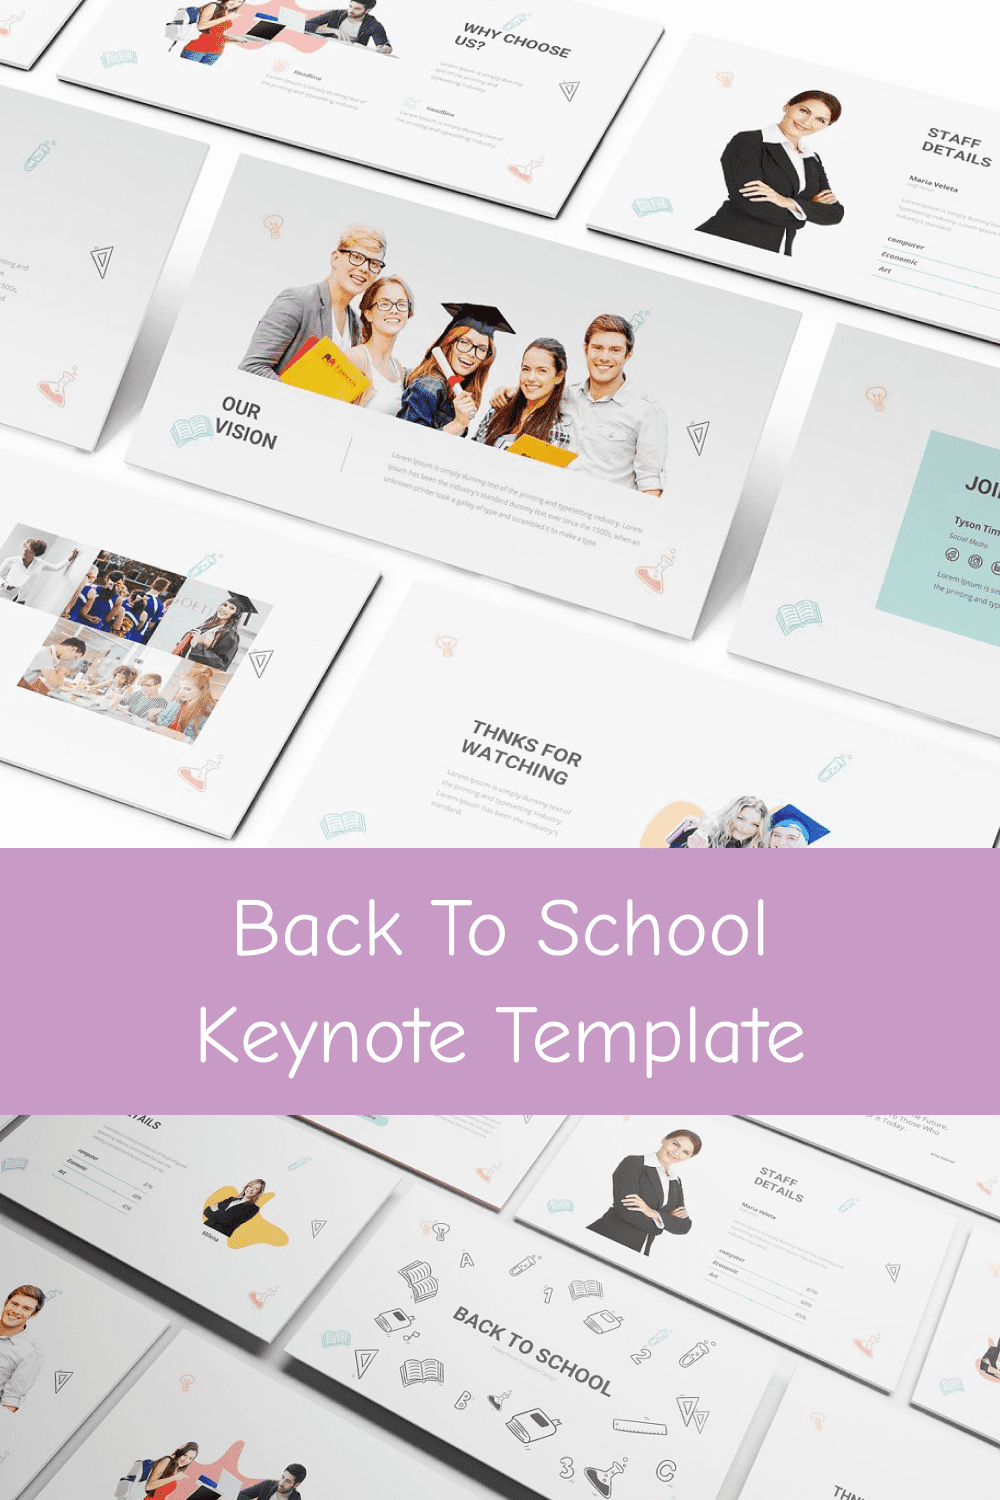 You can easy use and customize this template.